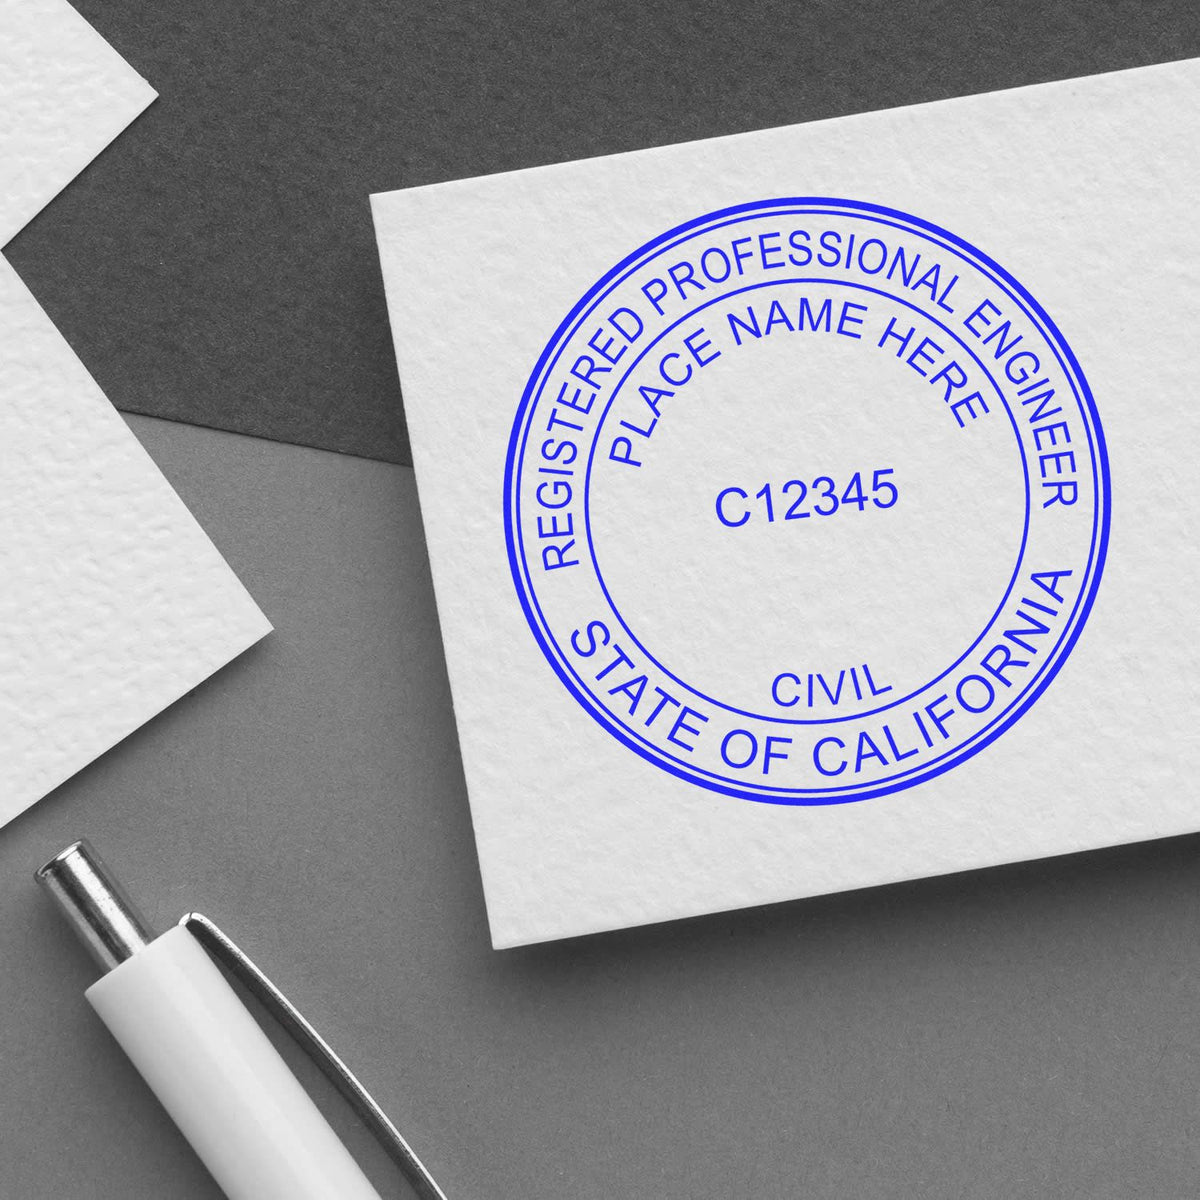 The Slim Pre-Inked California Professional Engineer Seal Stamp stamp impression comes to life with a crisp, detailed photo on paper - showcasing true professional quality.